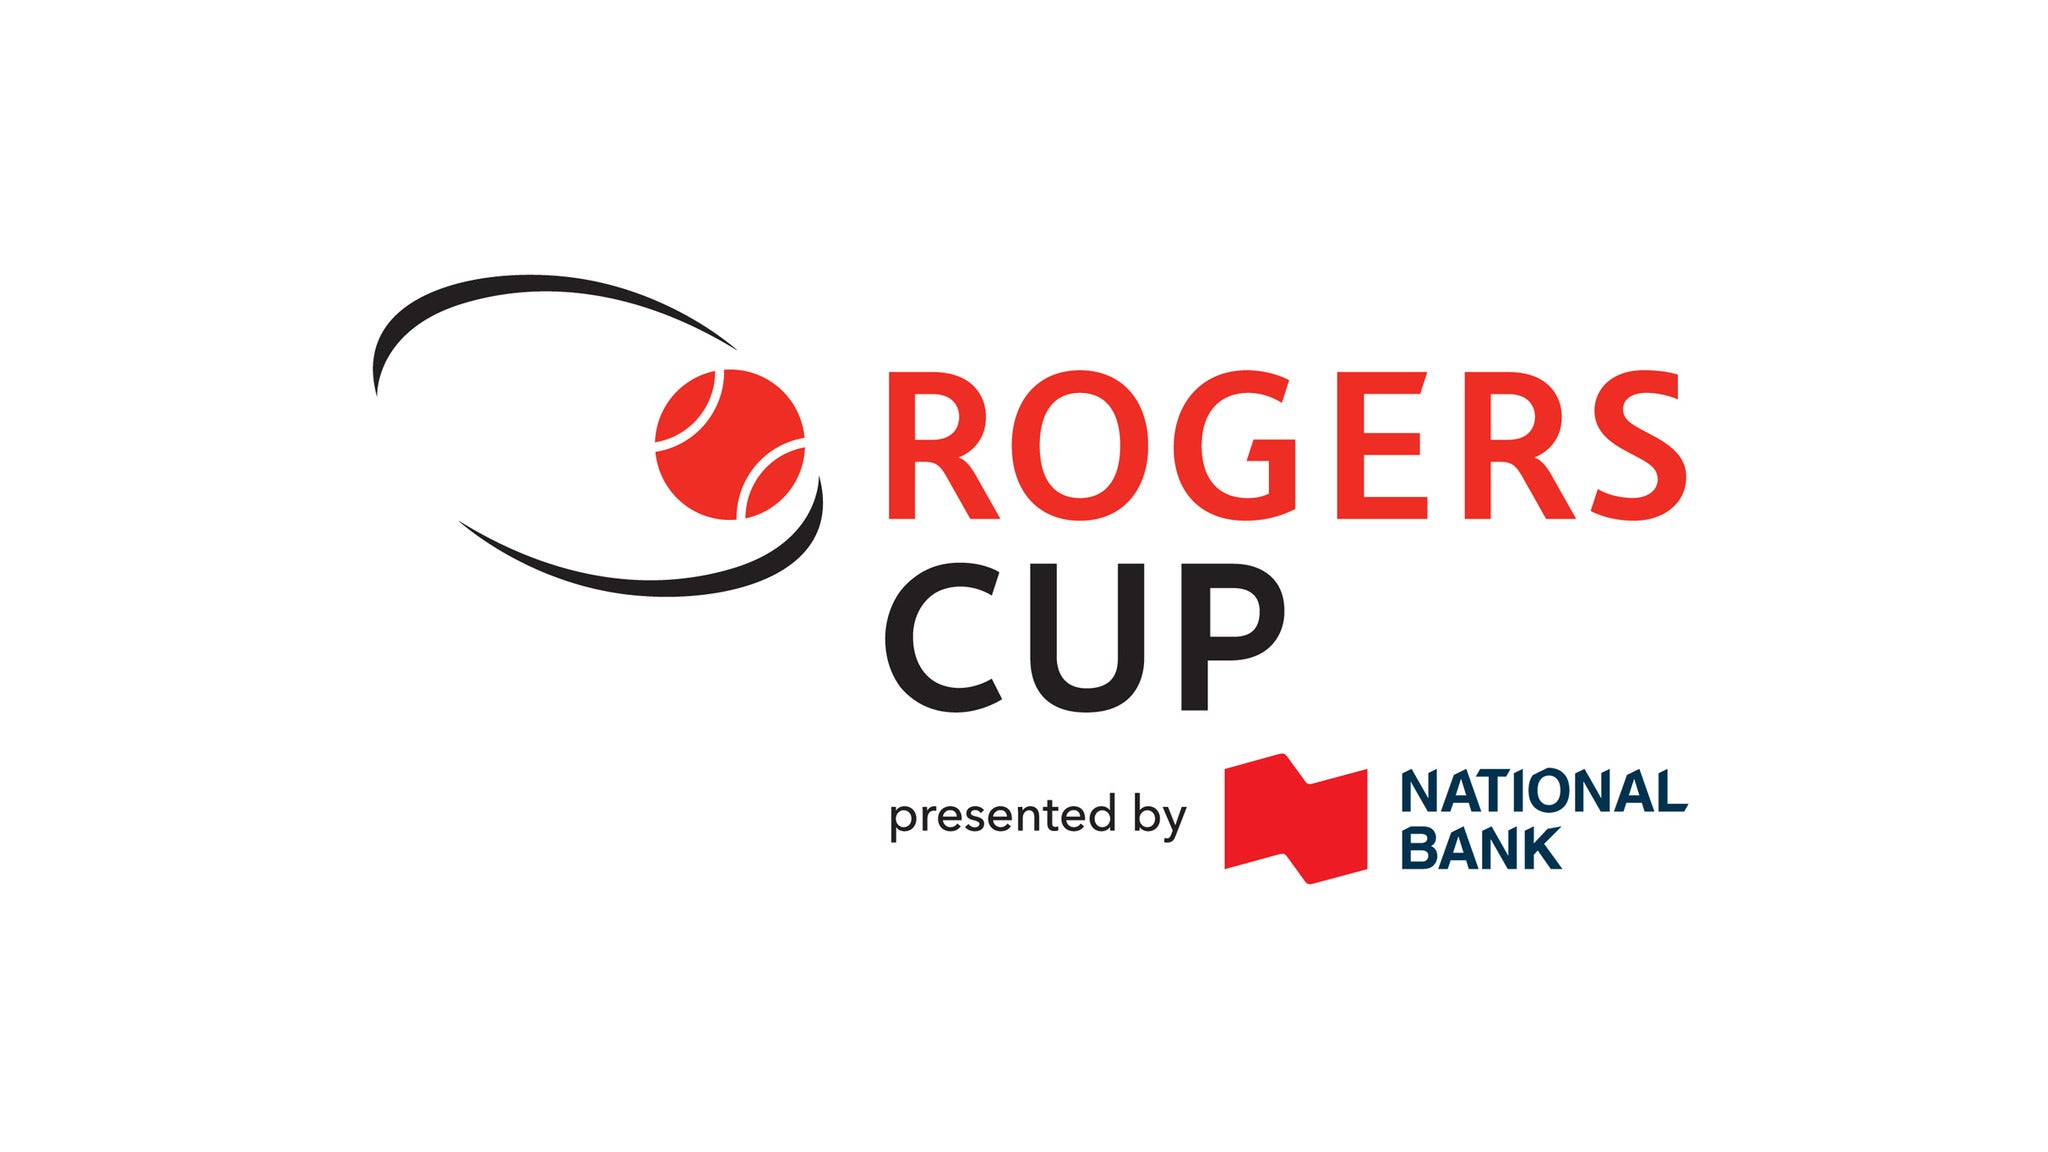 How do I get Rogers Cup tickets